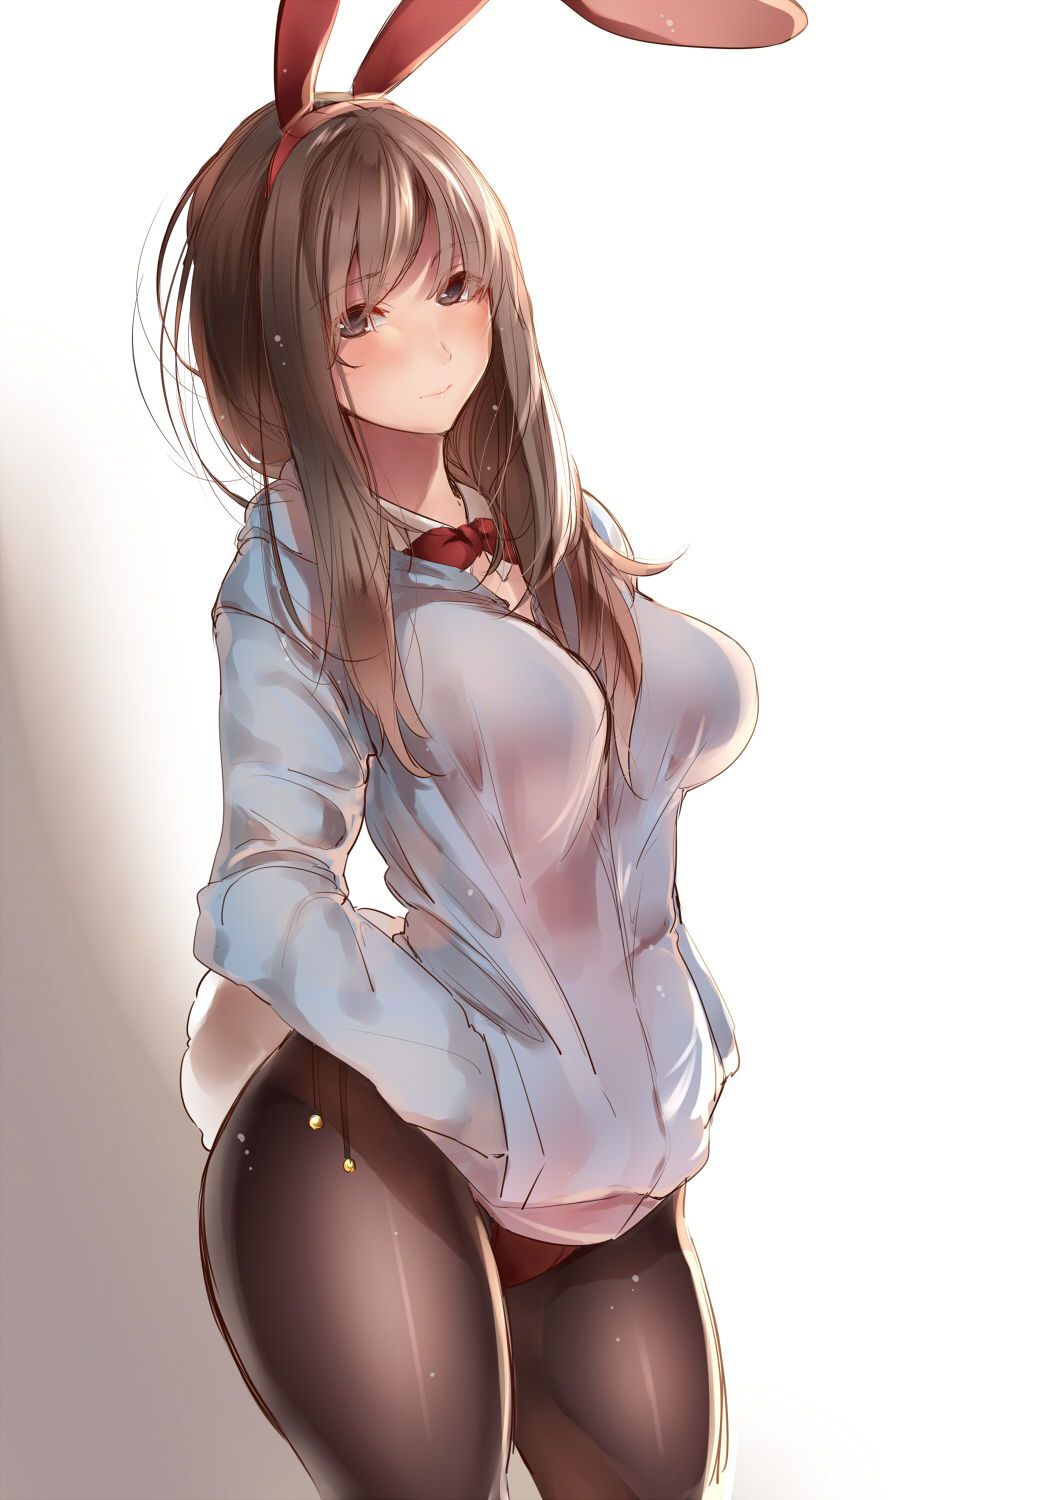 Please click here for the gentleman who likes the image of Bunny Girl. 25